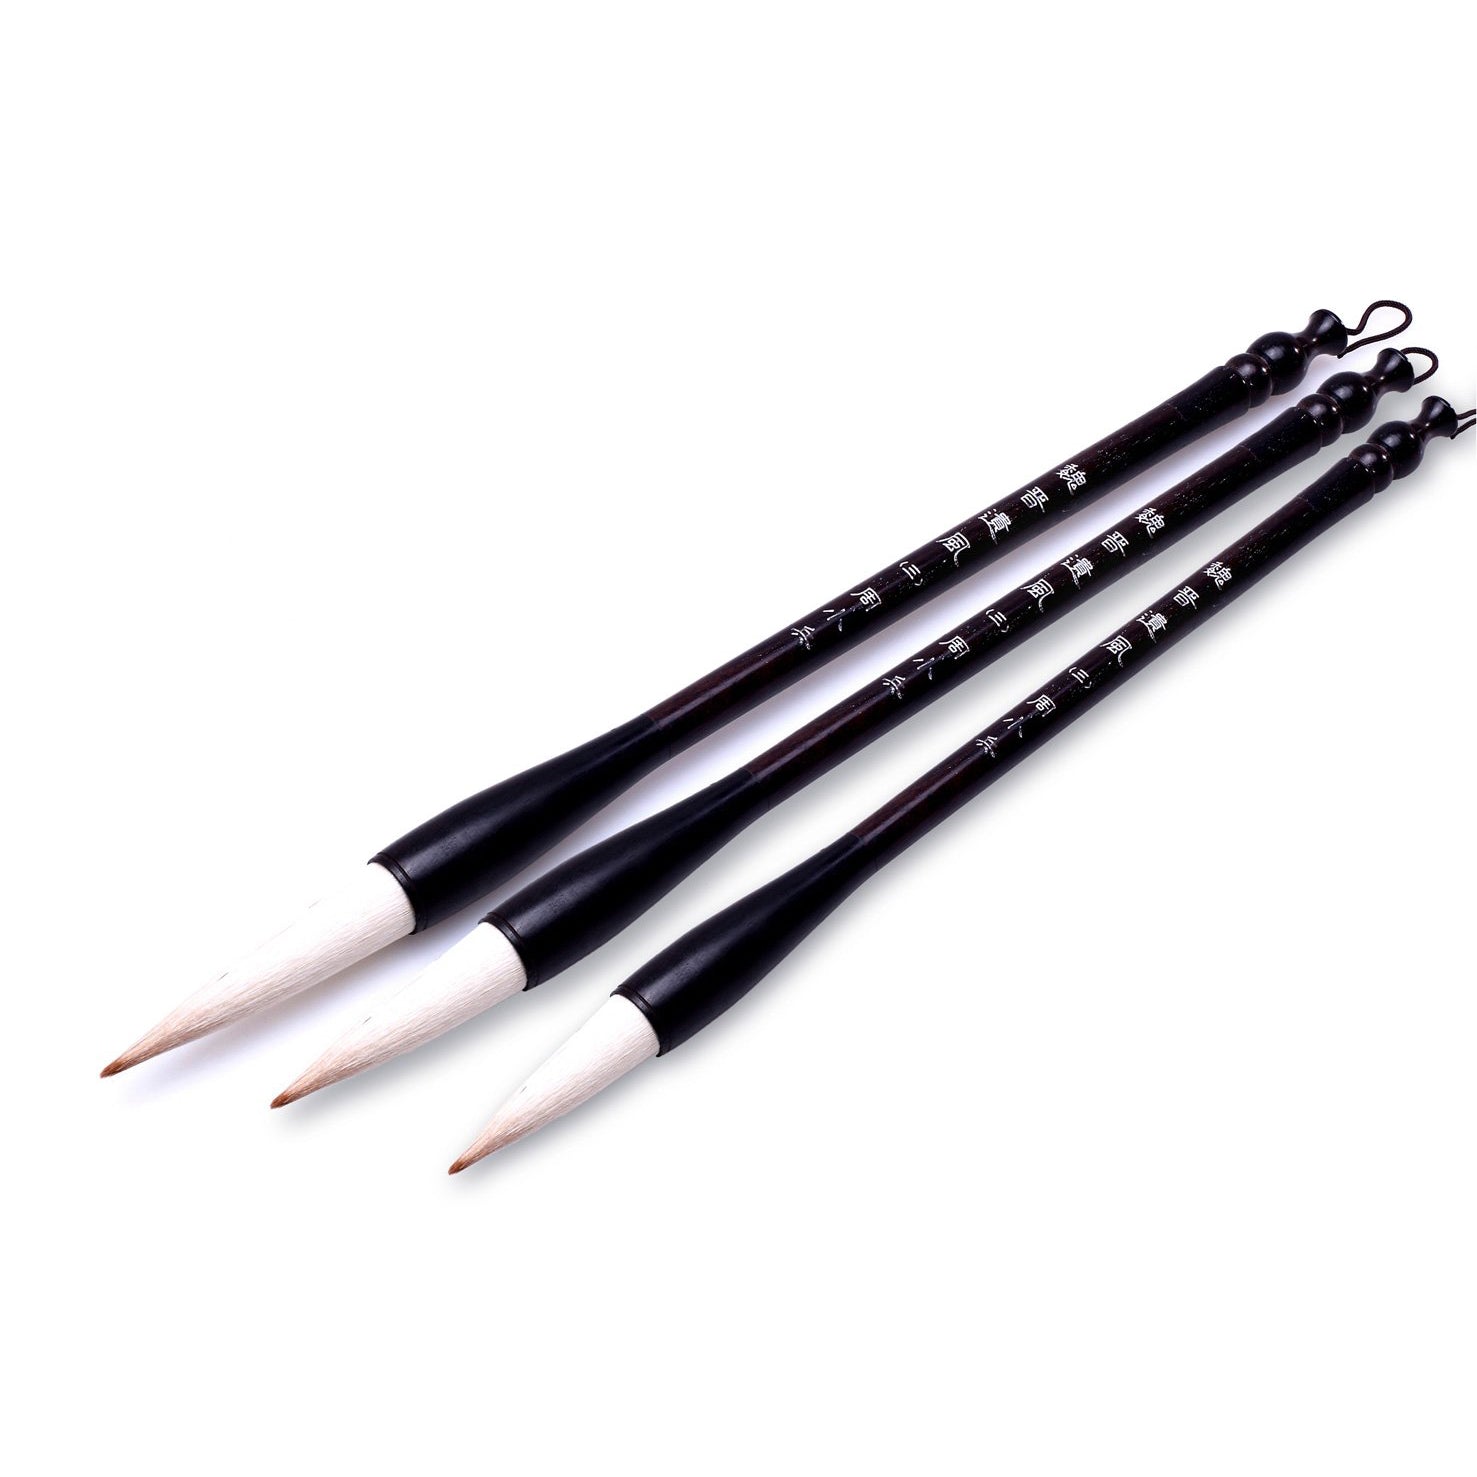 "In memory of Wei and Jin", set of 3 brushes made of Goat Hair with a Large Tip for Calligraphy Writing, Sumi-e and Fineline Painting.